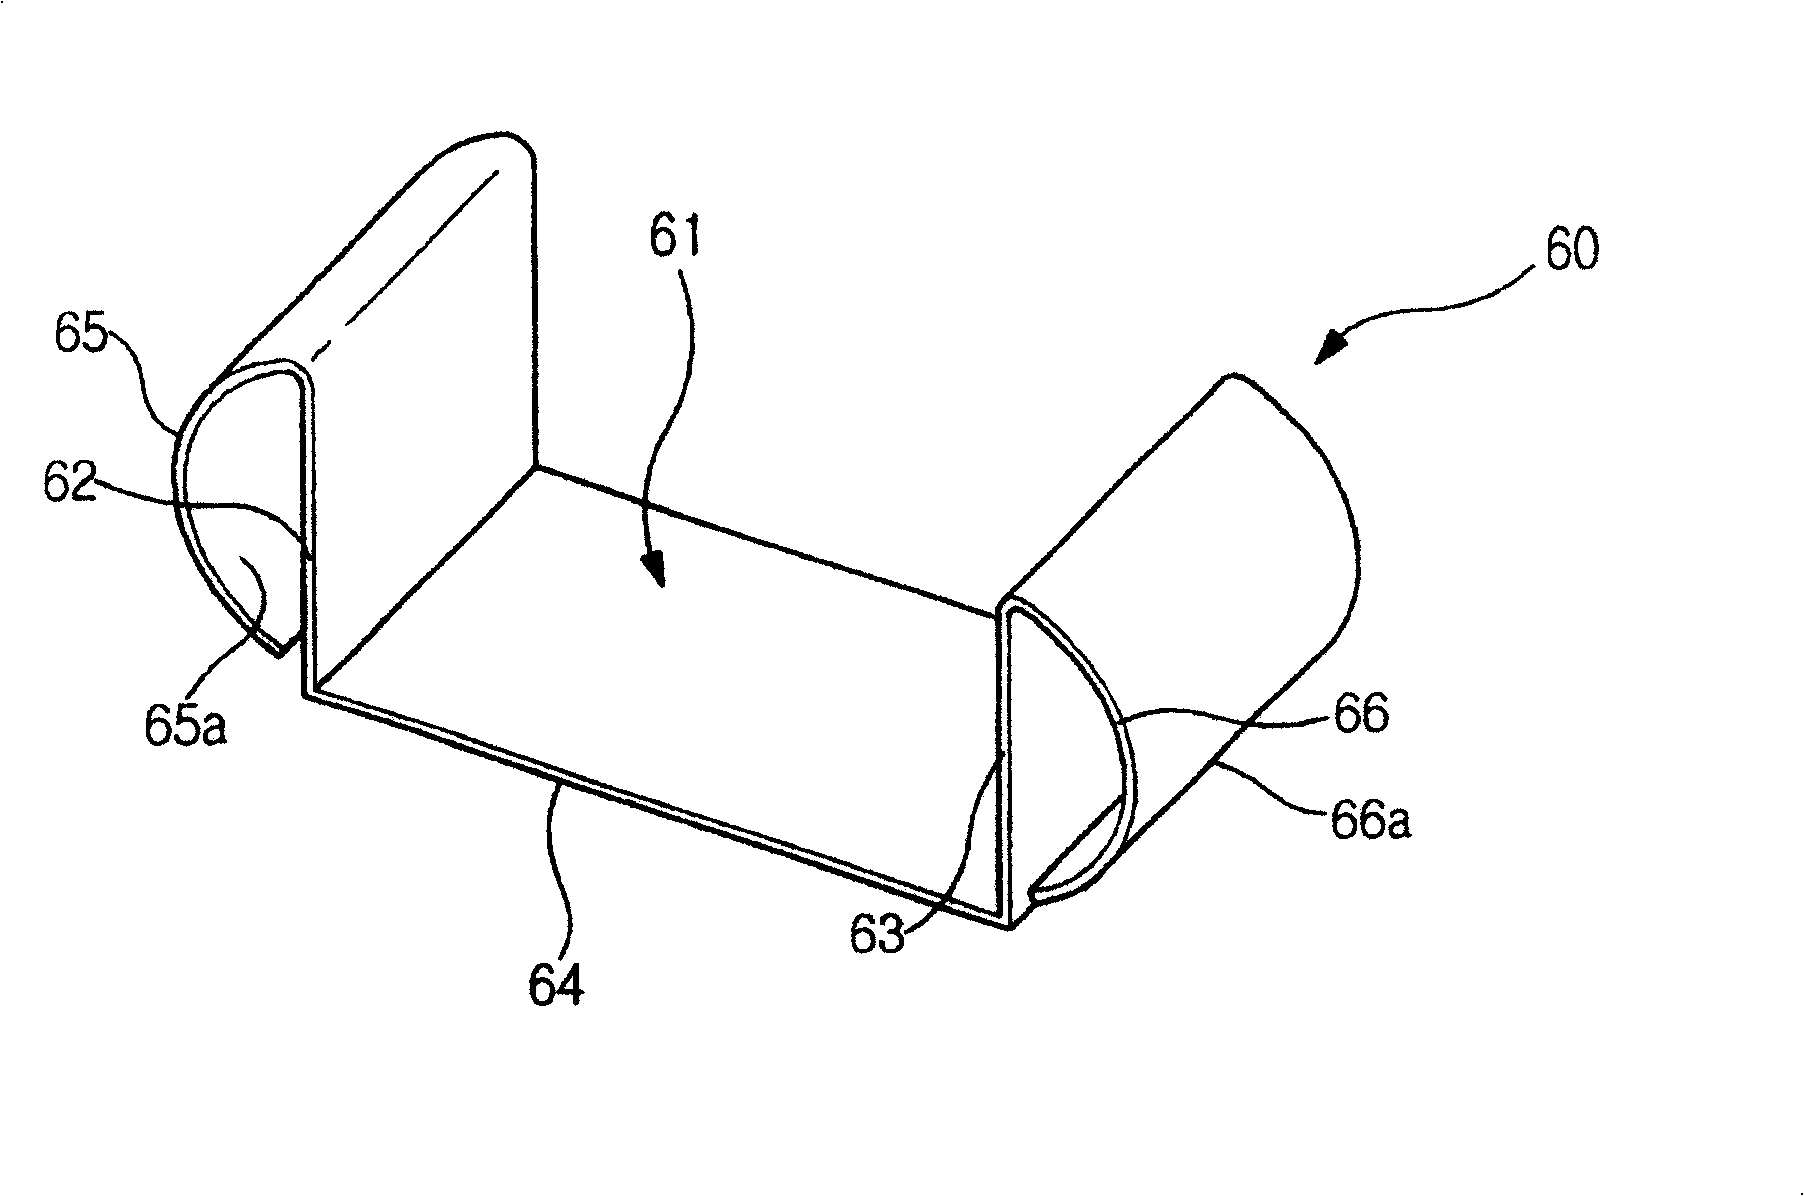 Heat exchanger bracket and air conditioner within the same